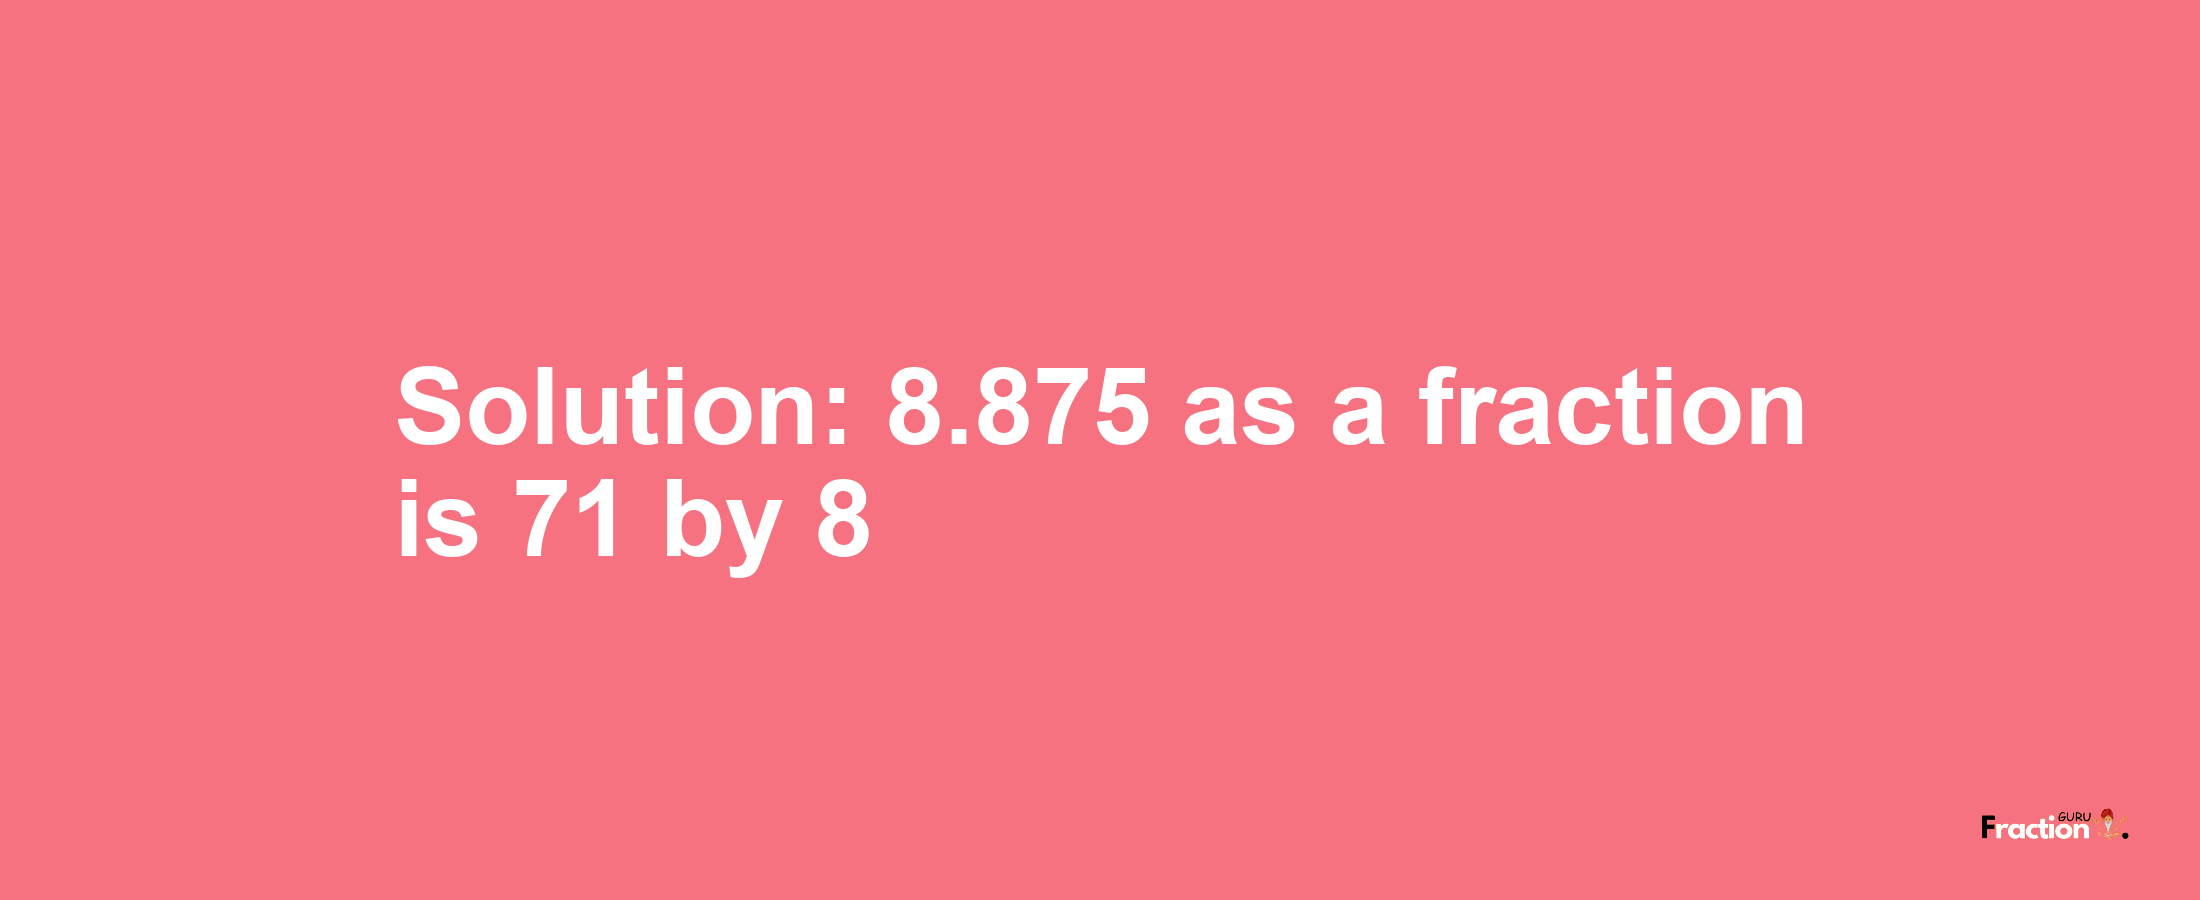 Solution:8.875 as a fraction is 71/8